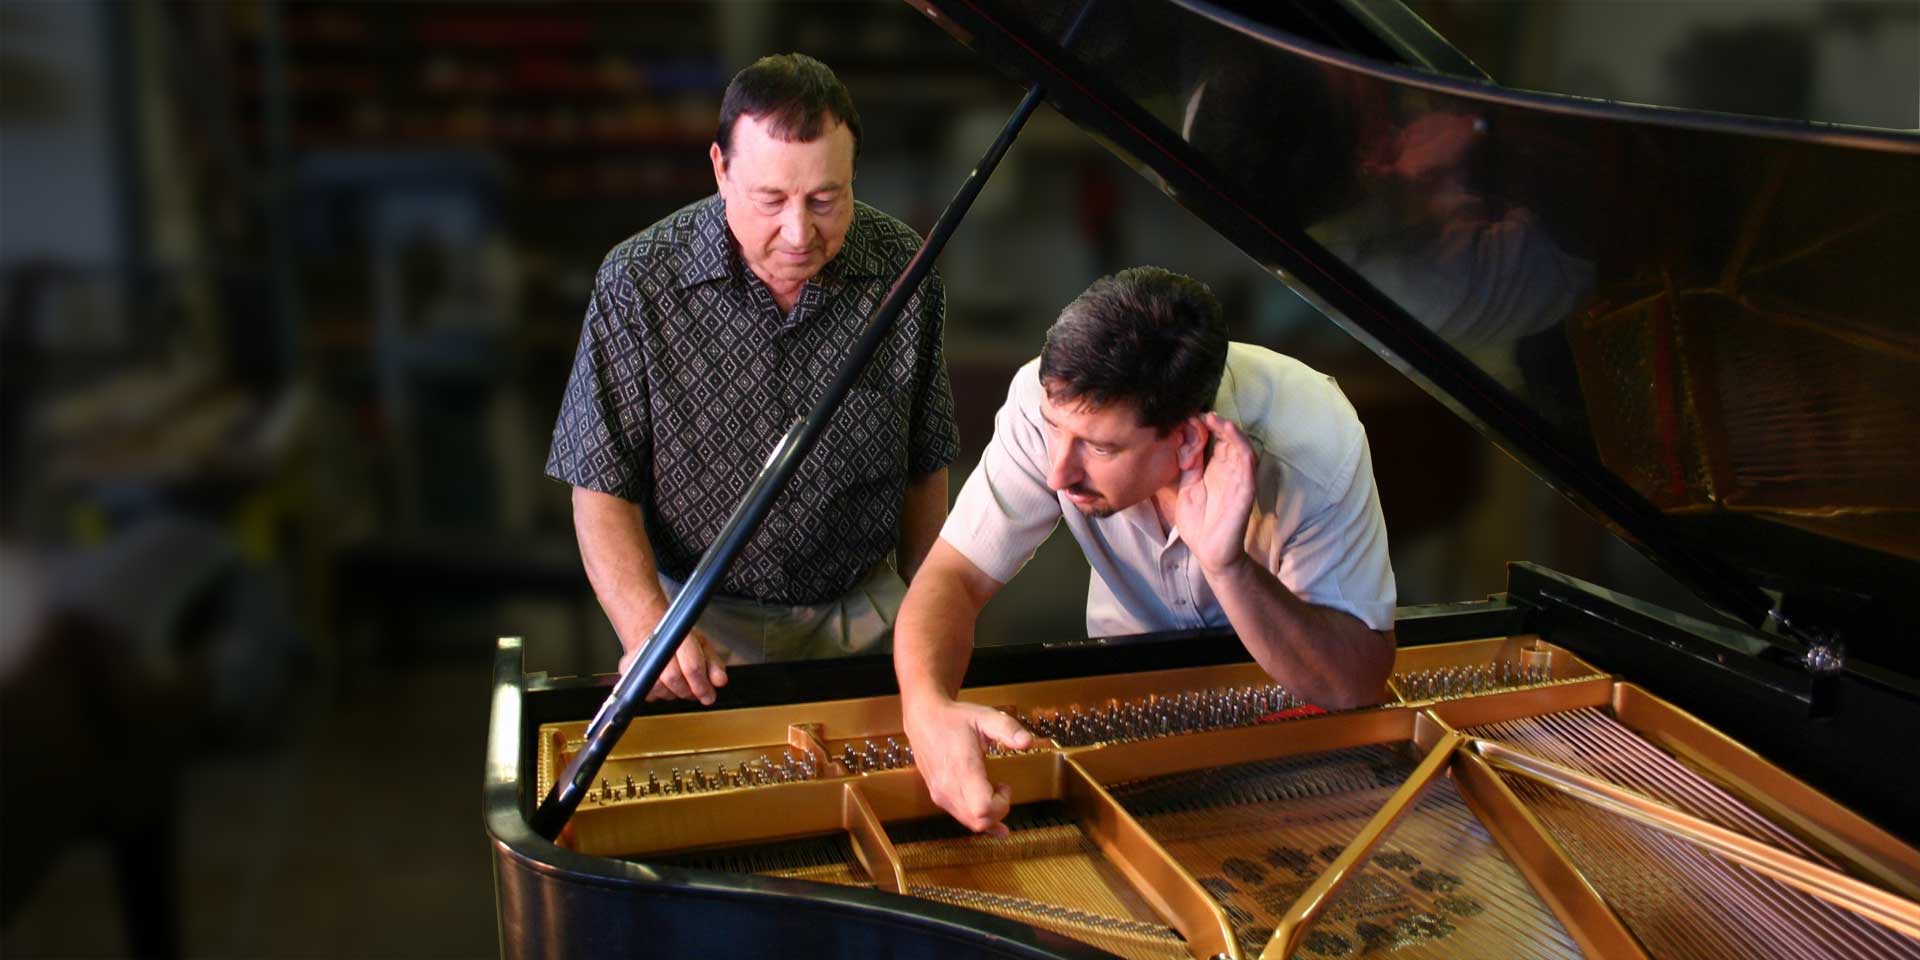 Franco and his late father Giovanni testing sound on a grand piano